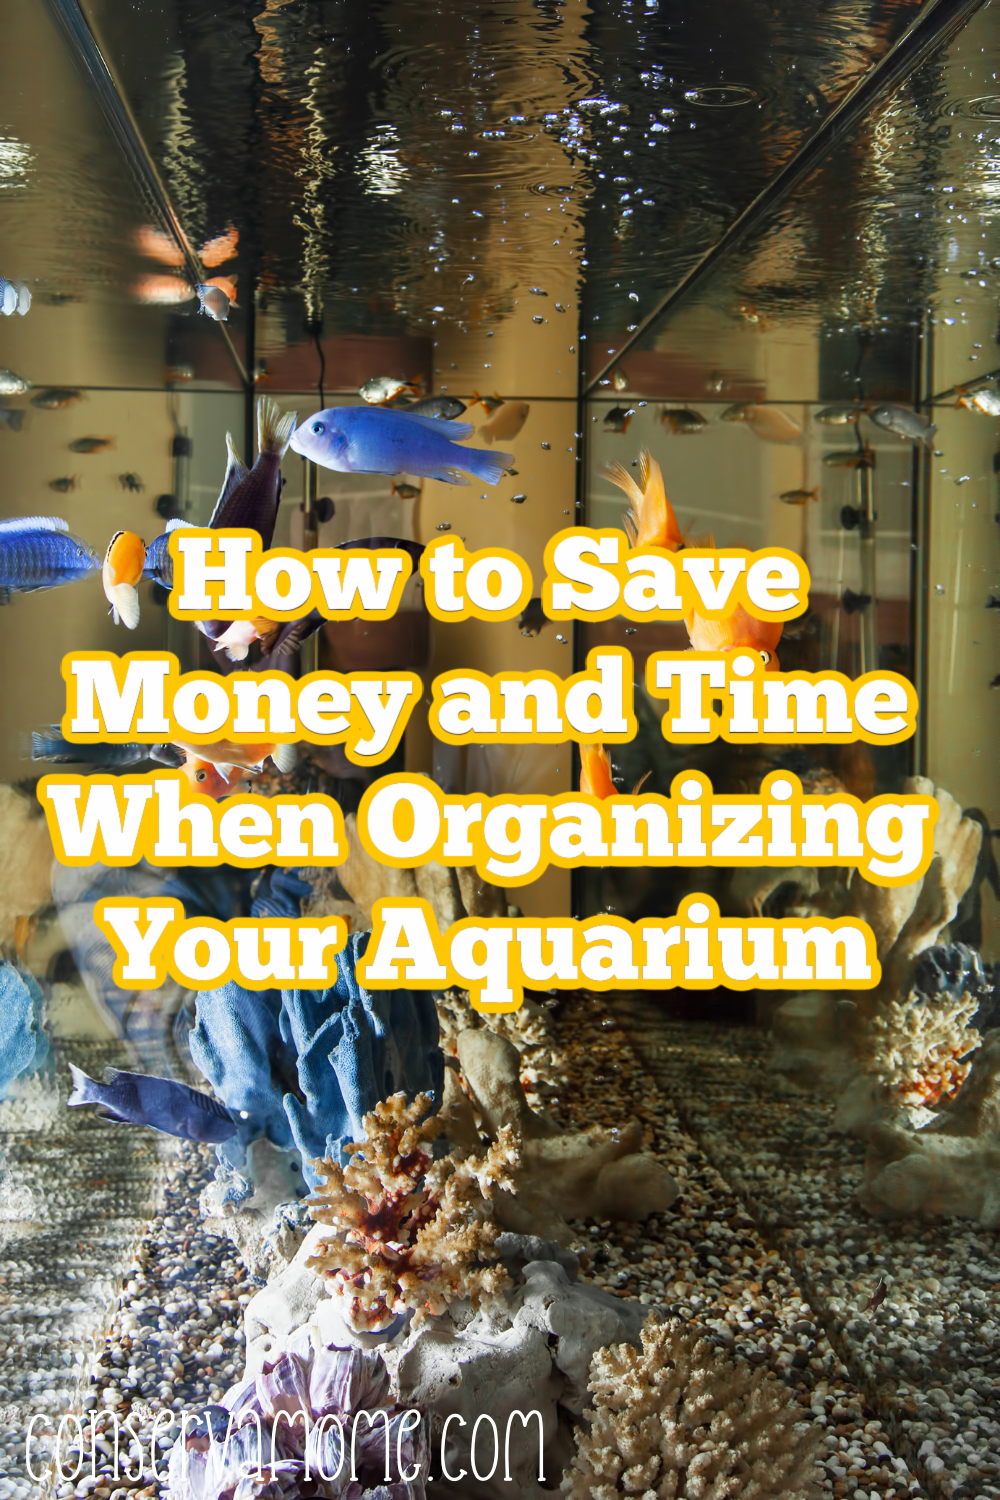  How to Save Money and Time When Organizing Your Aquarium 